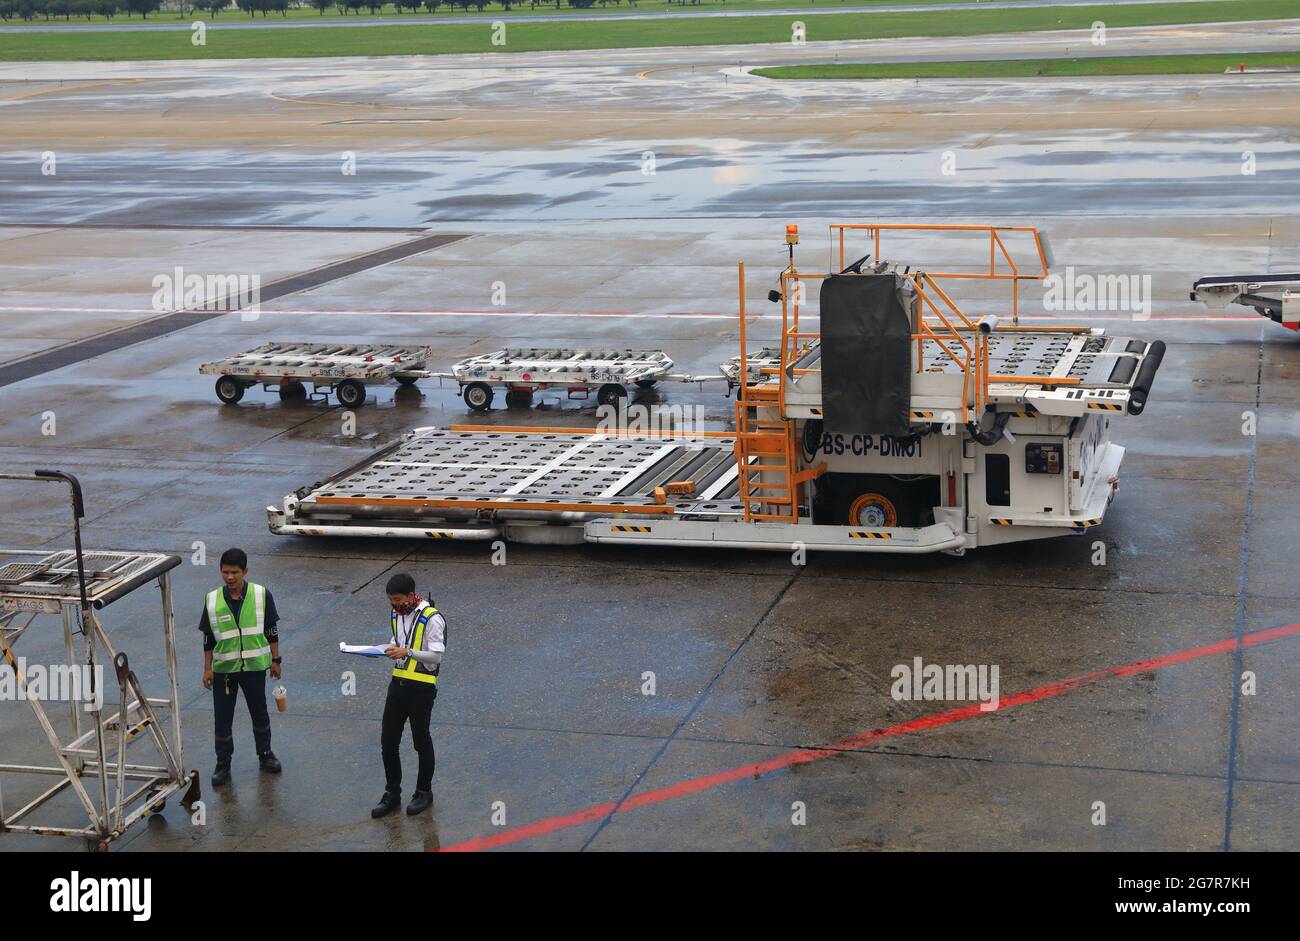 DON-MUEANG, BANGKOK - MAY 2018 : Ground support equipment standby for services in Apron near aircraft bay. Stock Photo